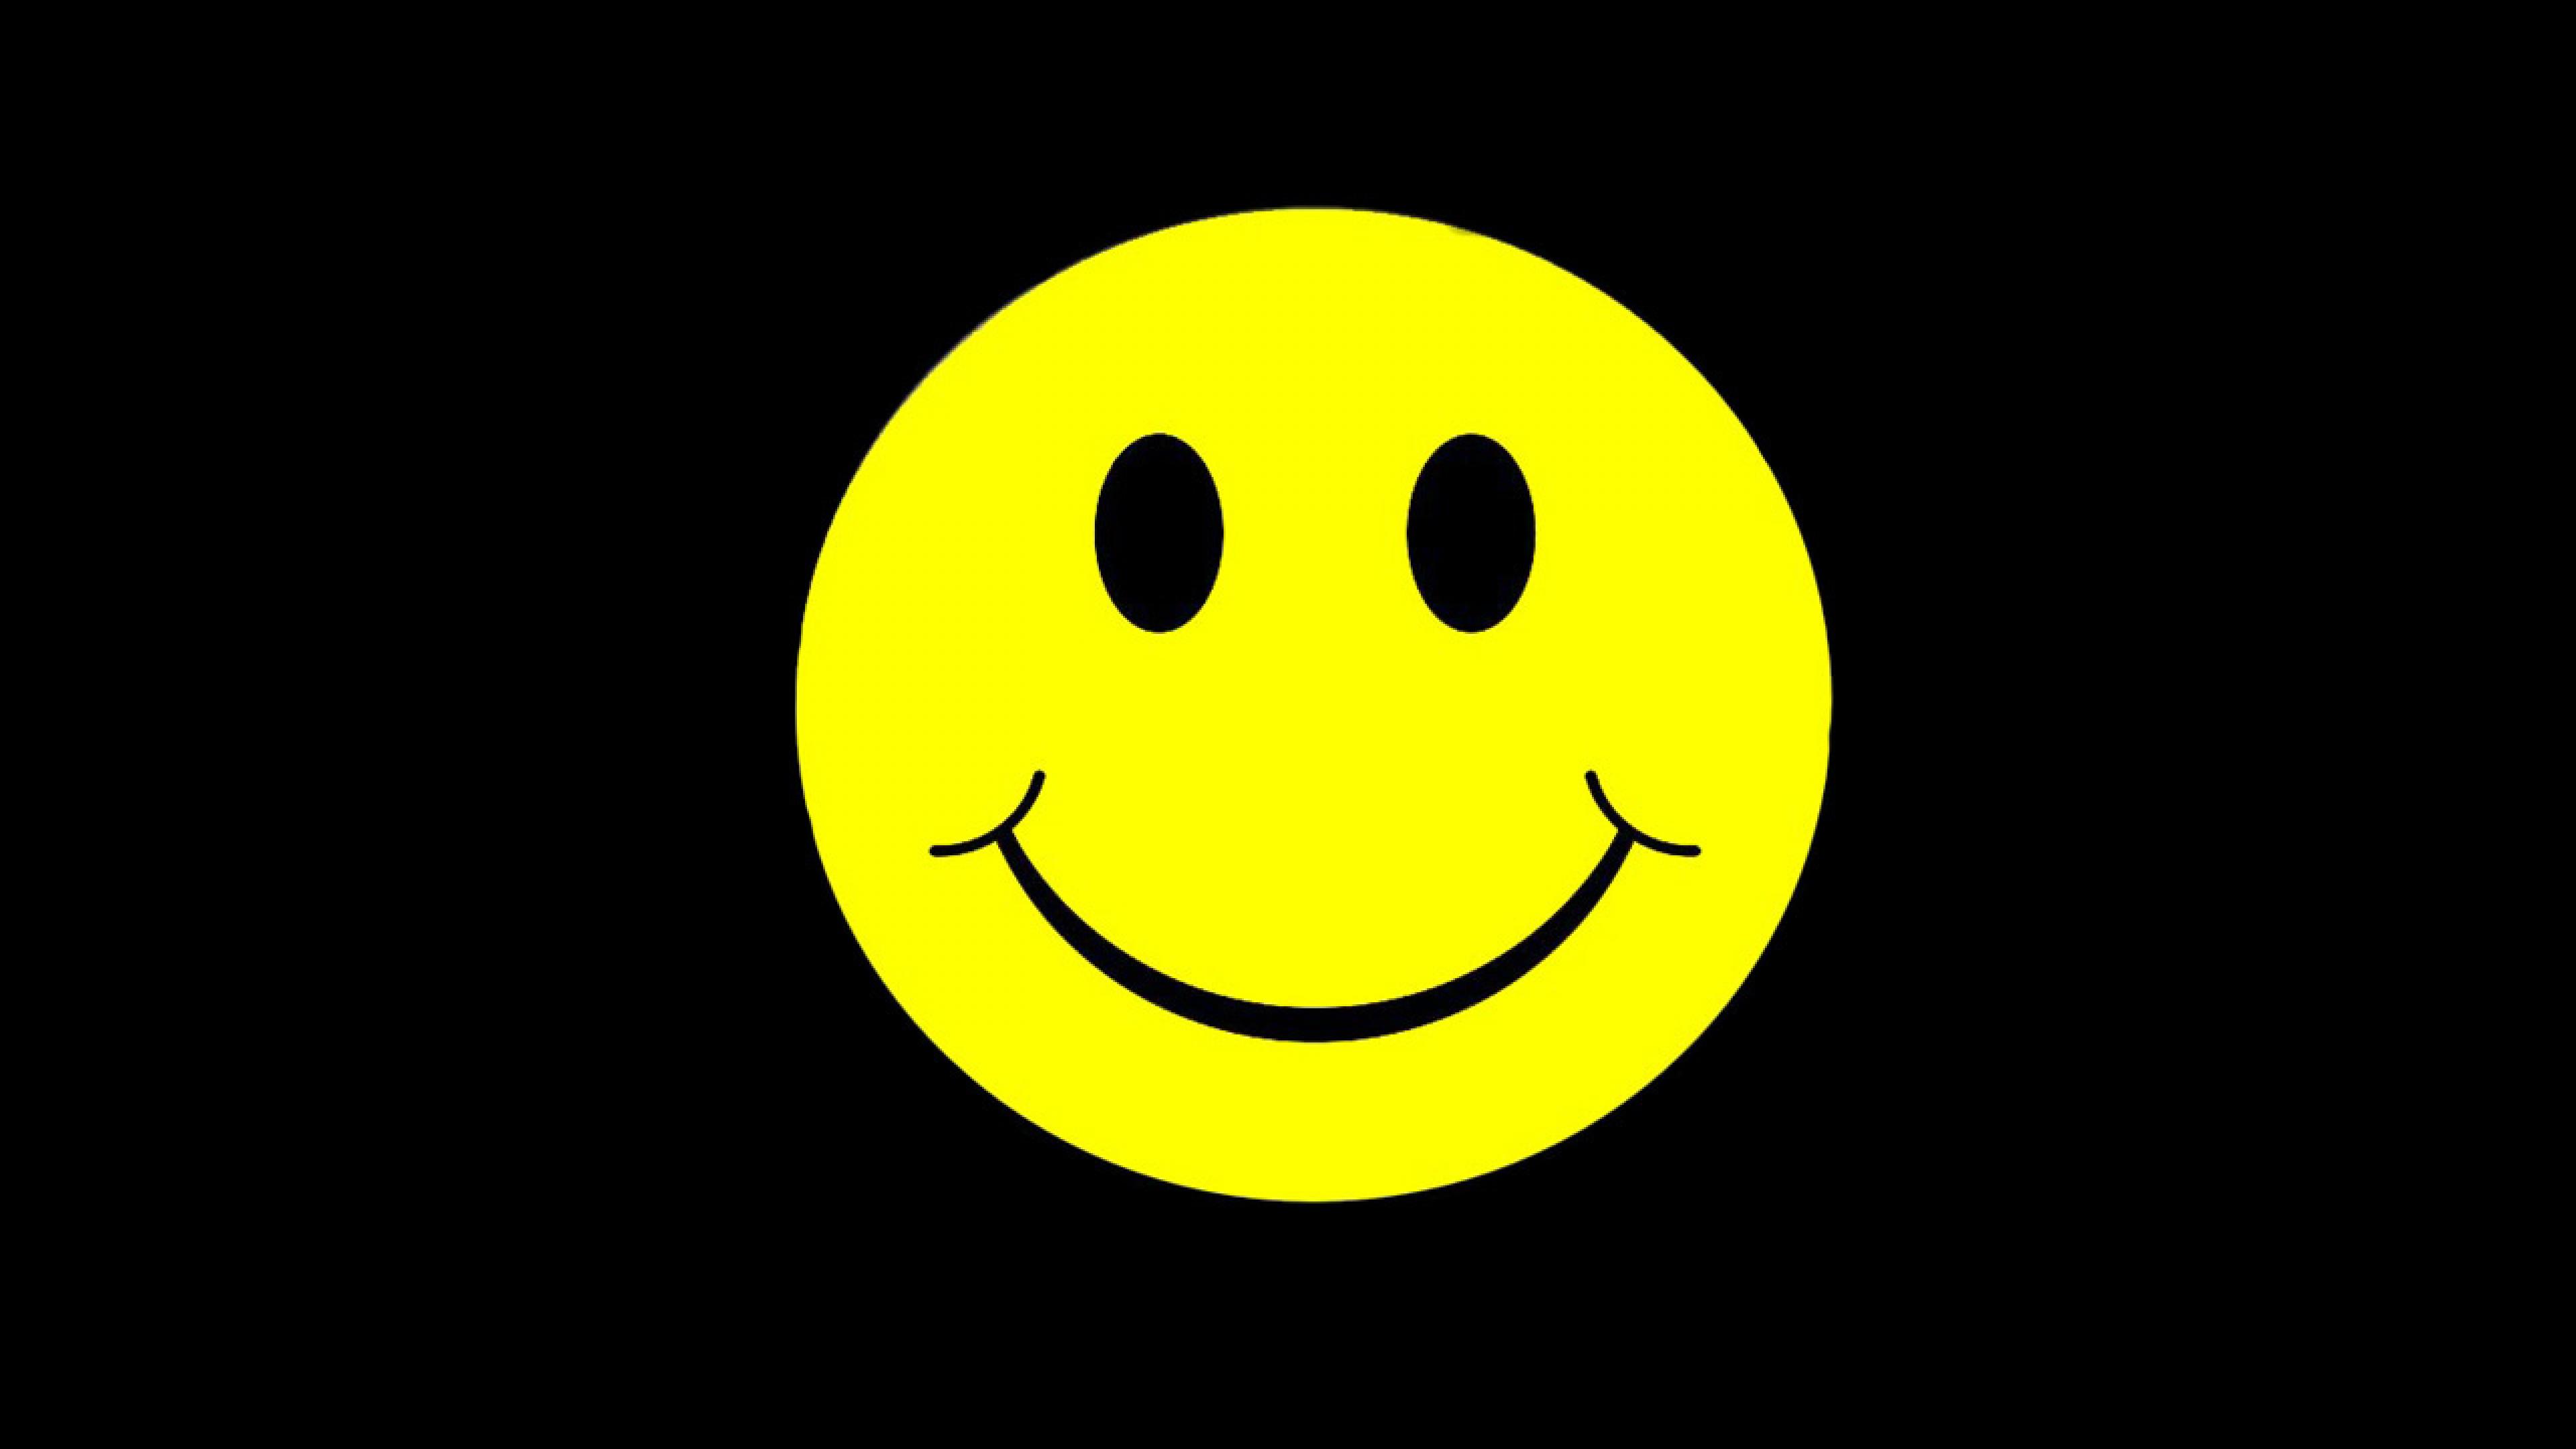 Smiley Face Black Background On